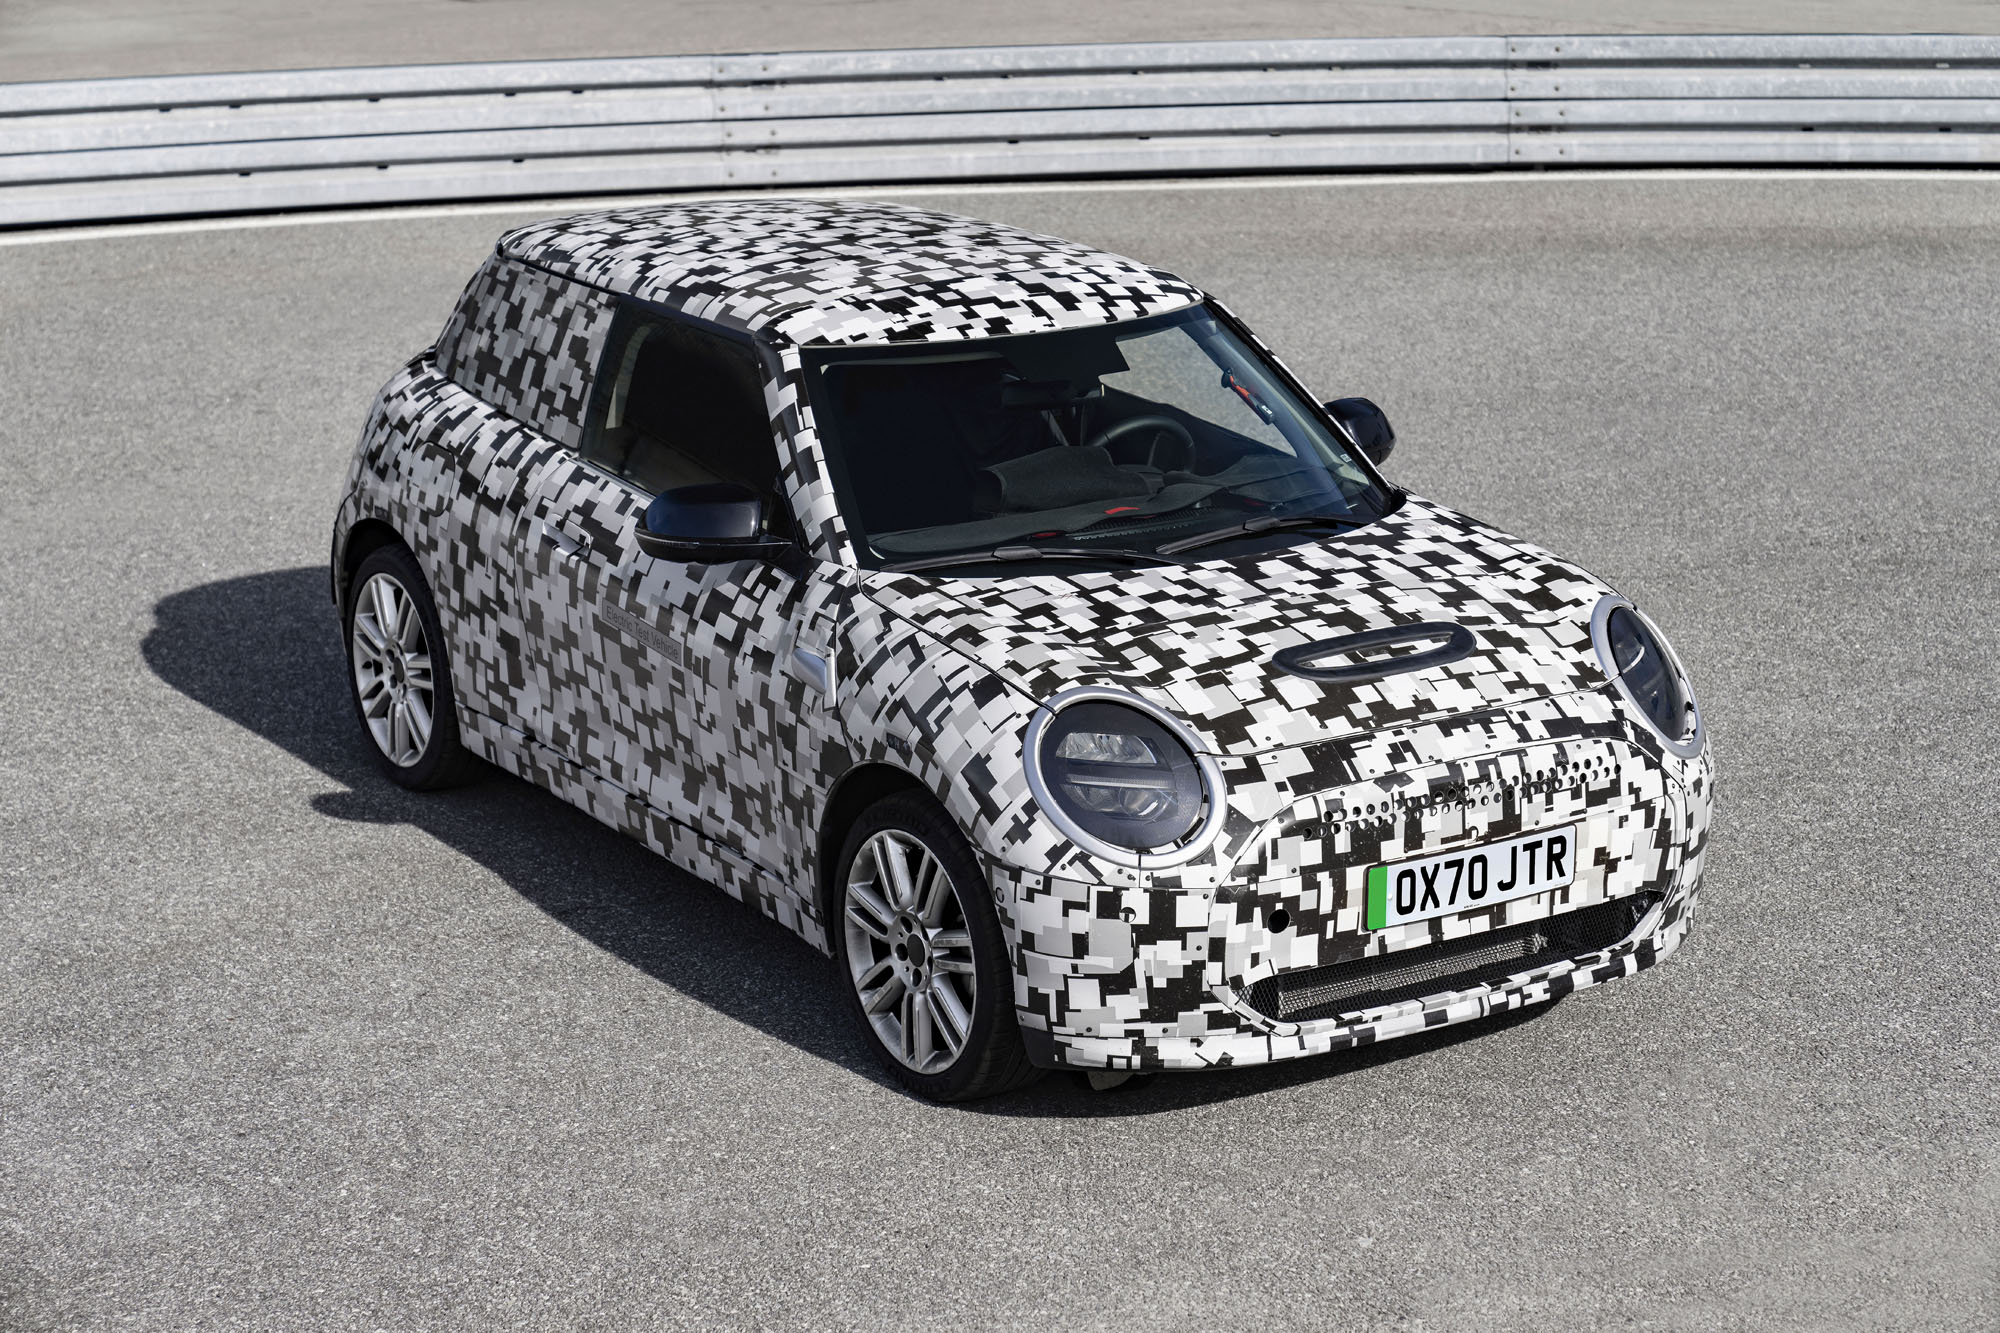 Mini Hardtop next generation shown in first official photos - Autoblog